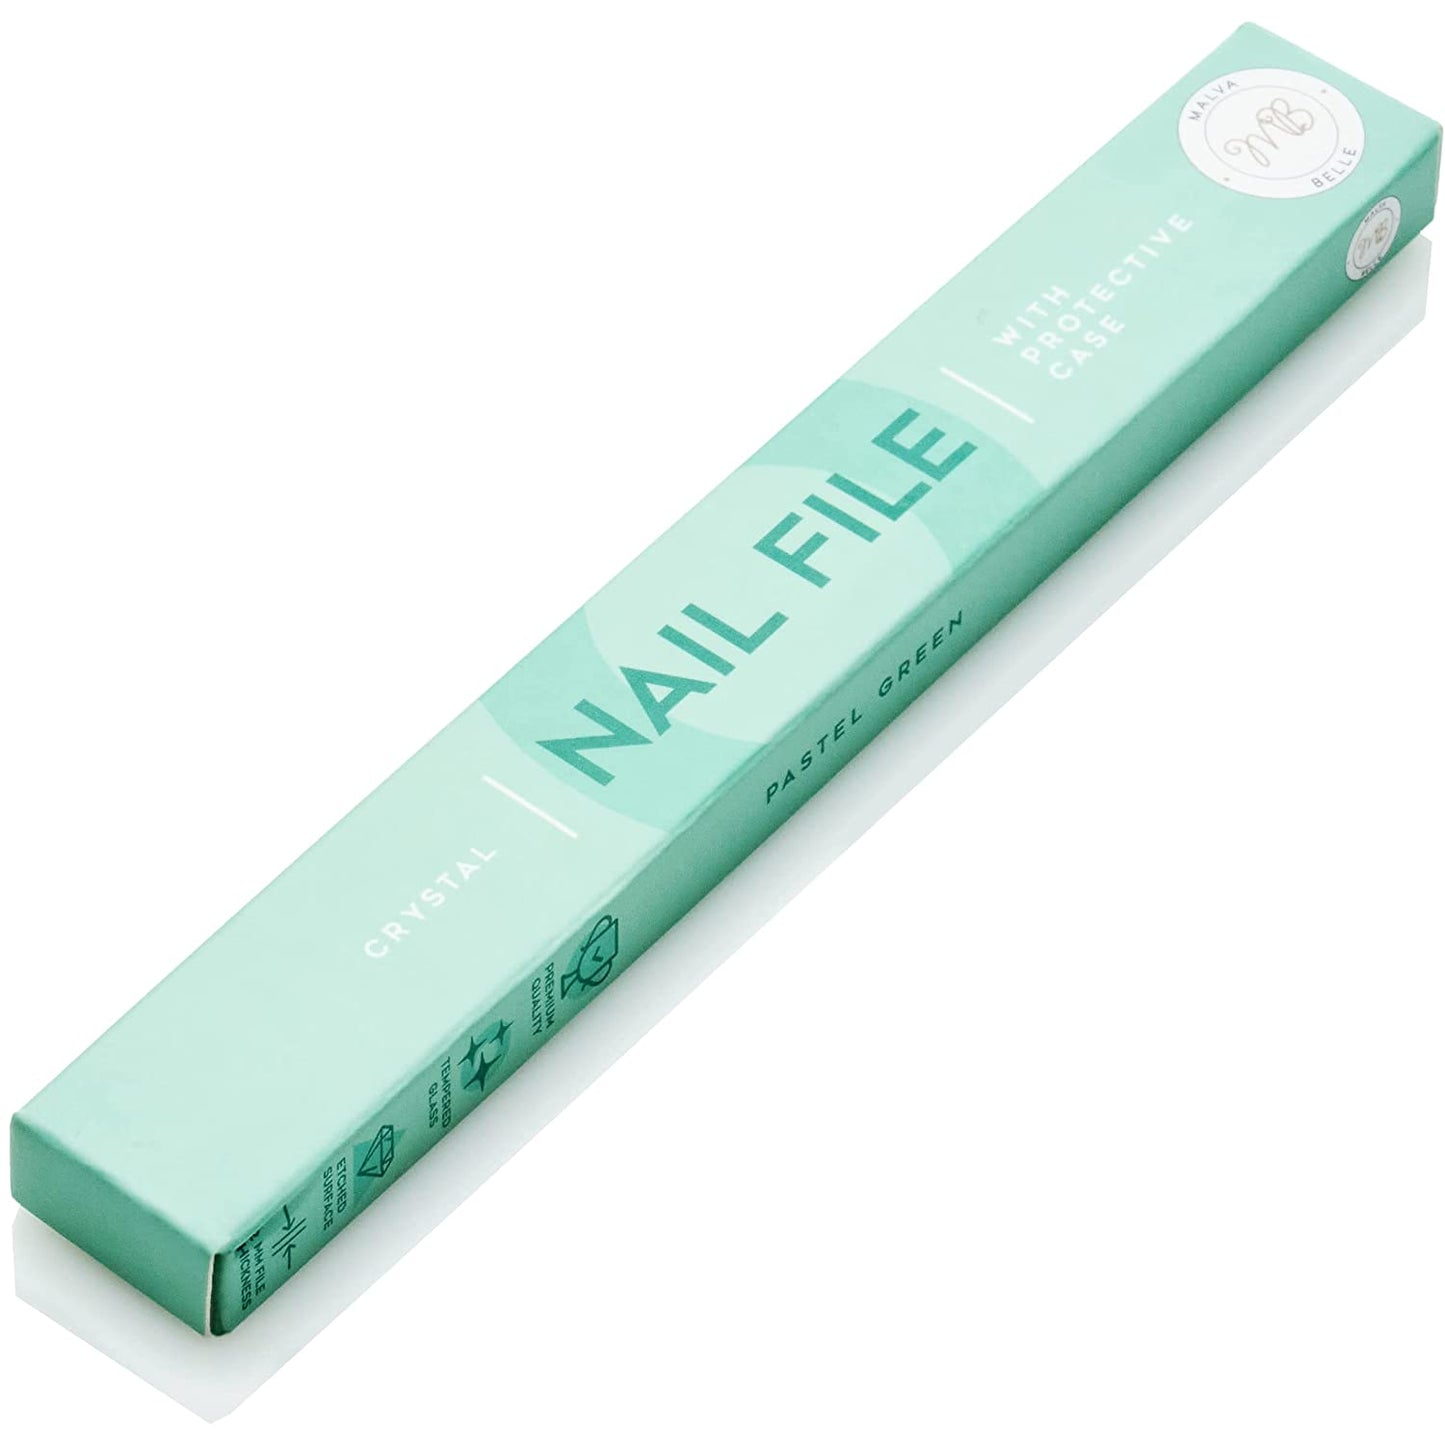 Crystal Glass Nail File with Protective Case - Pastel Green, 2mm